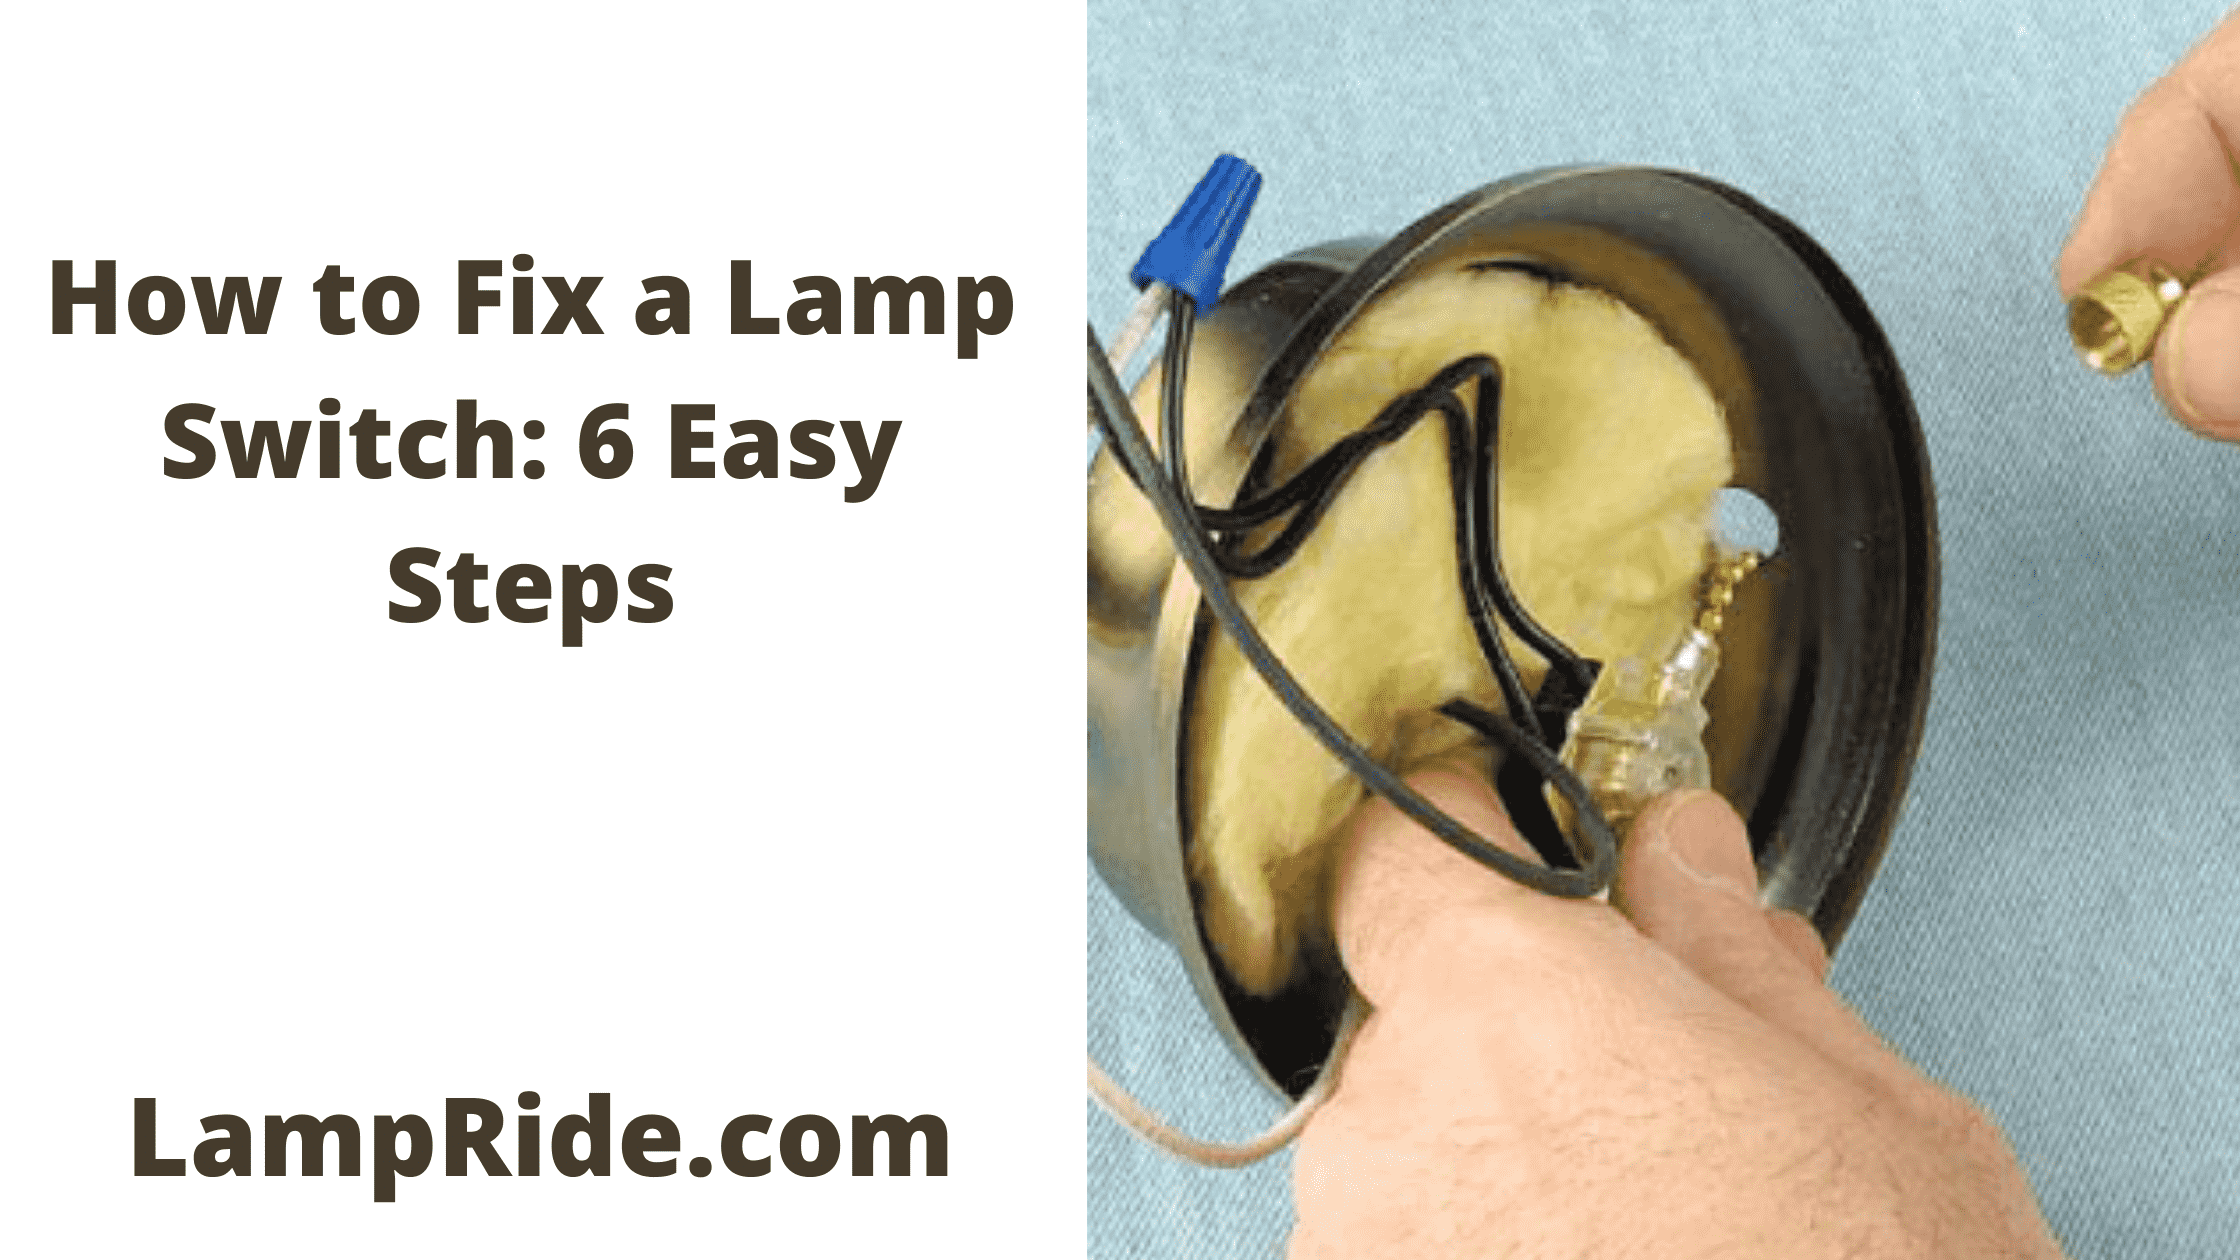 Fix A Lamp Switch In 6 Easy Steps, How To Replace A Rotary Switch On Floor Lamp